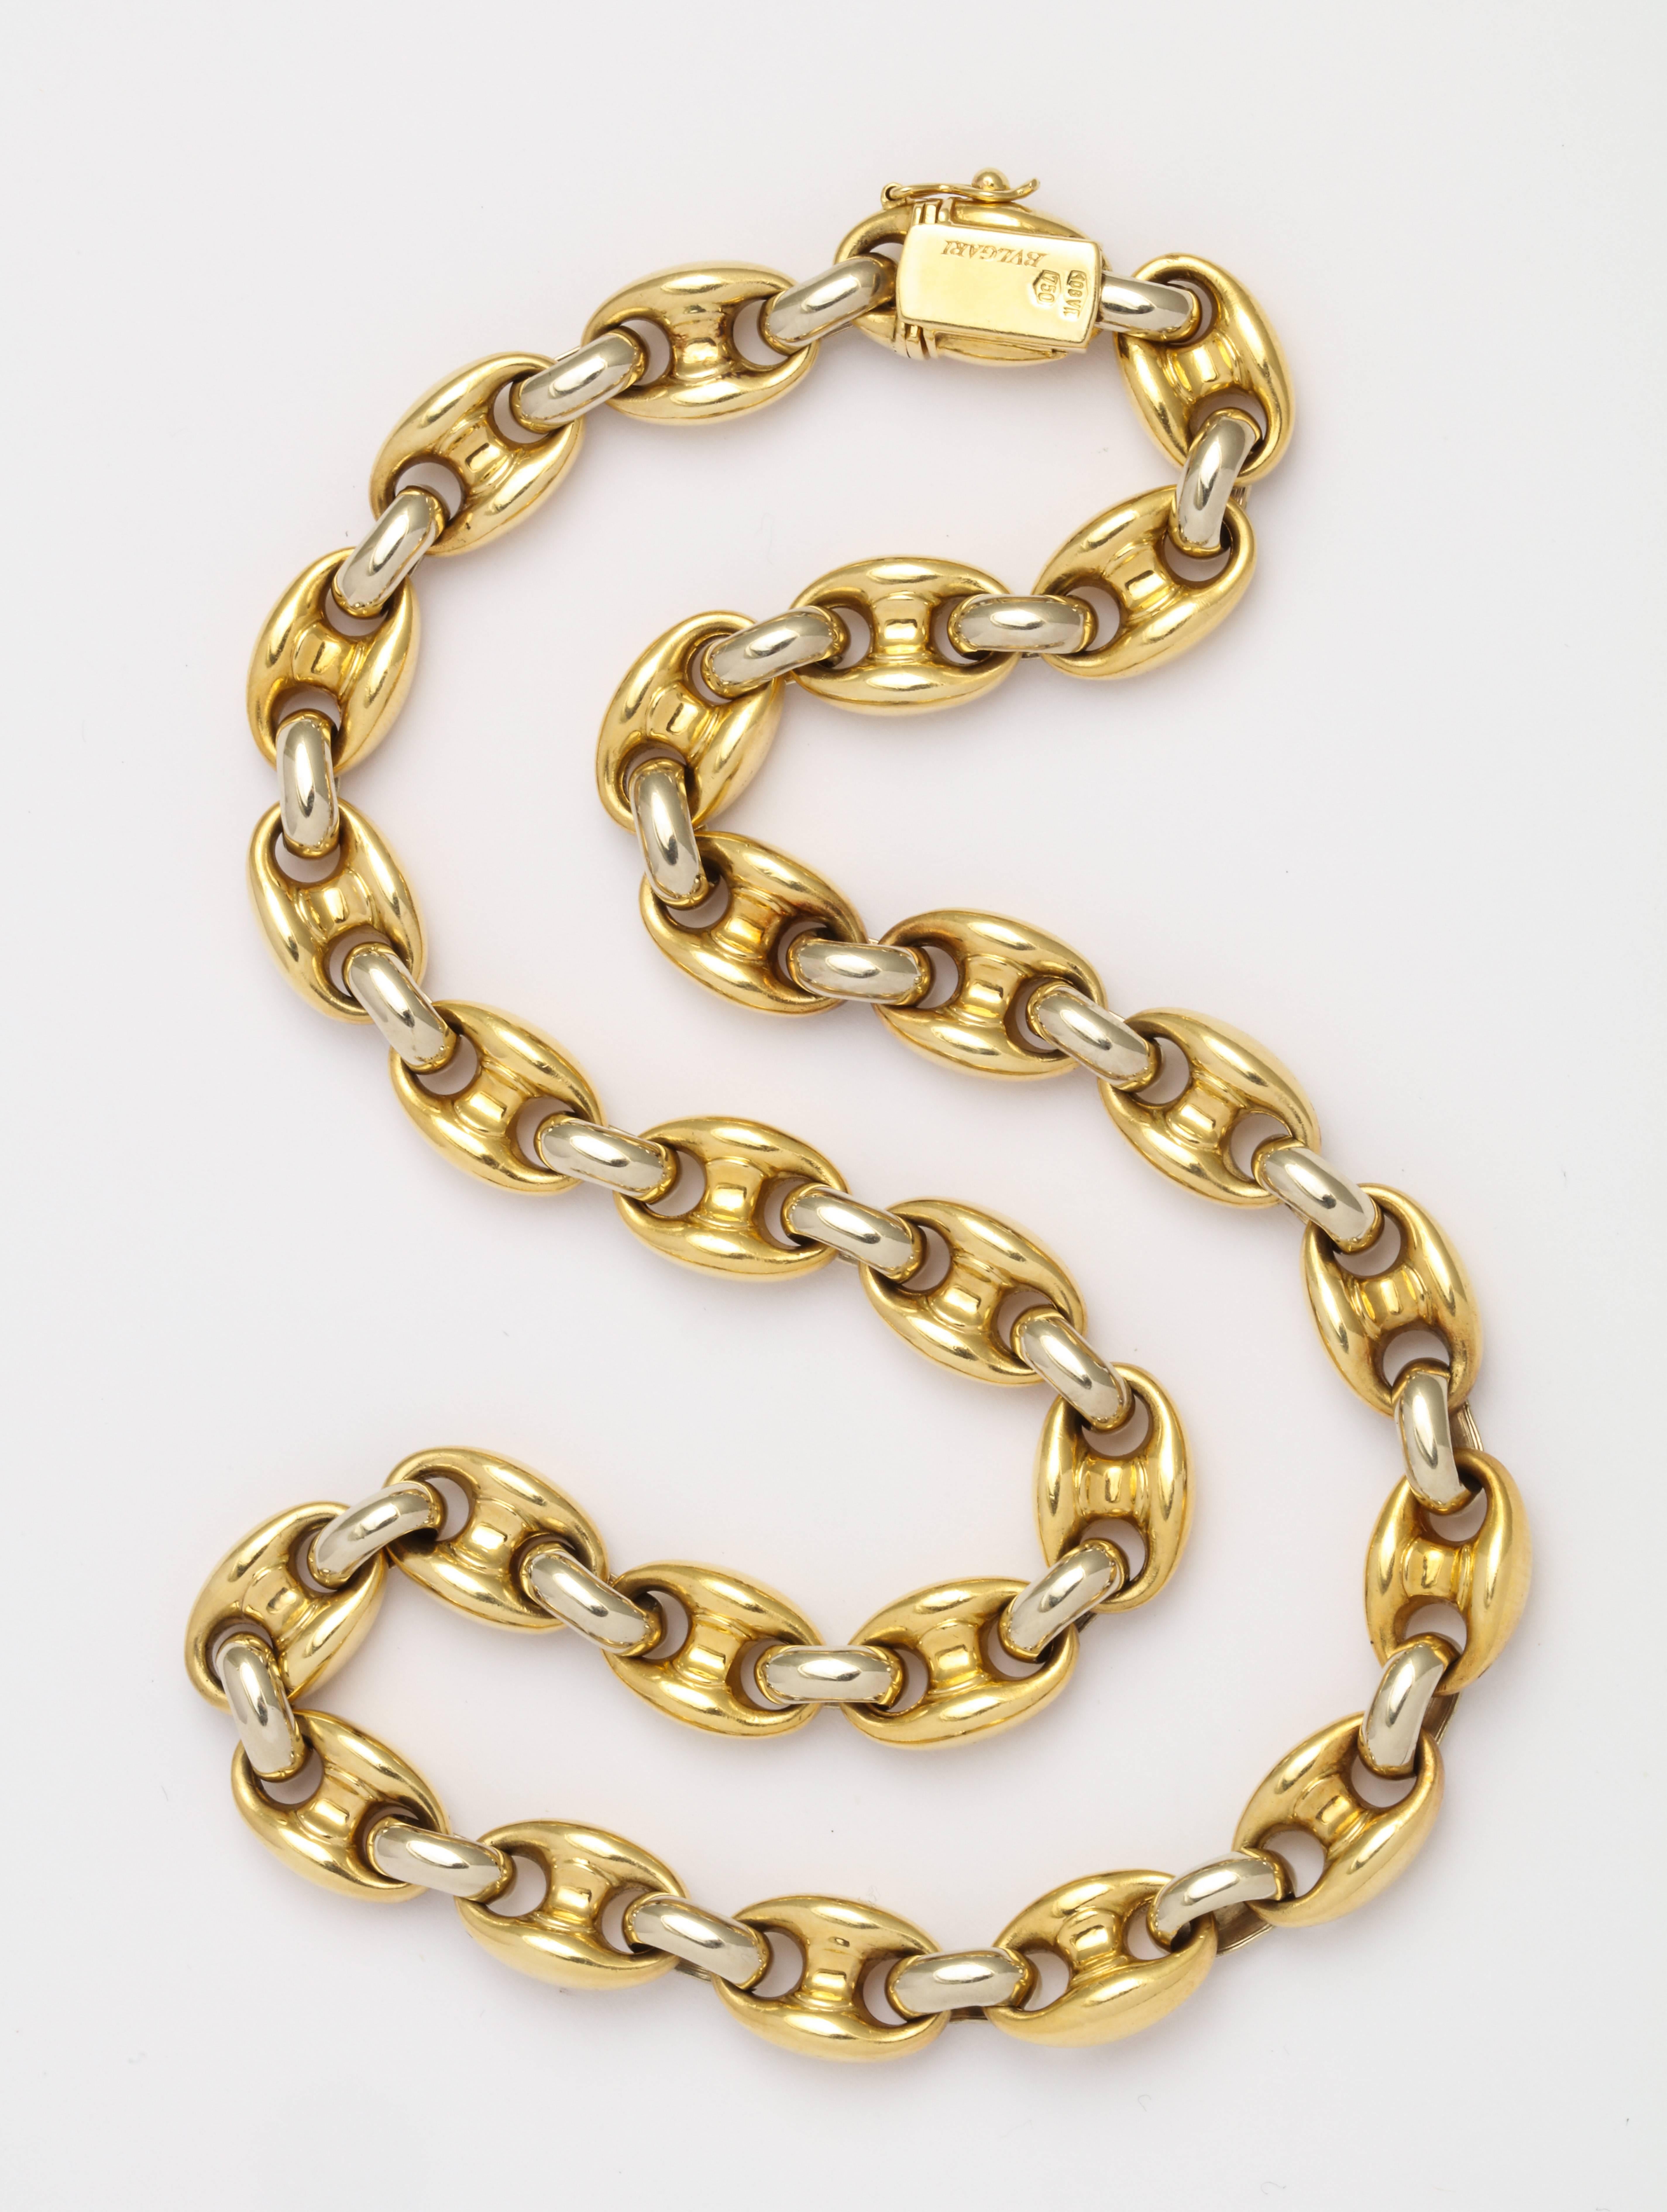 A classic, ready to wear Bulgari chain in this iconic link!  This chain is 16 1/2 inch length, making it perfect for layering, or wearing alone as statement. Two tone 18K gold is great for mixing and matching with a range of other jewelry pieces.